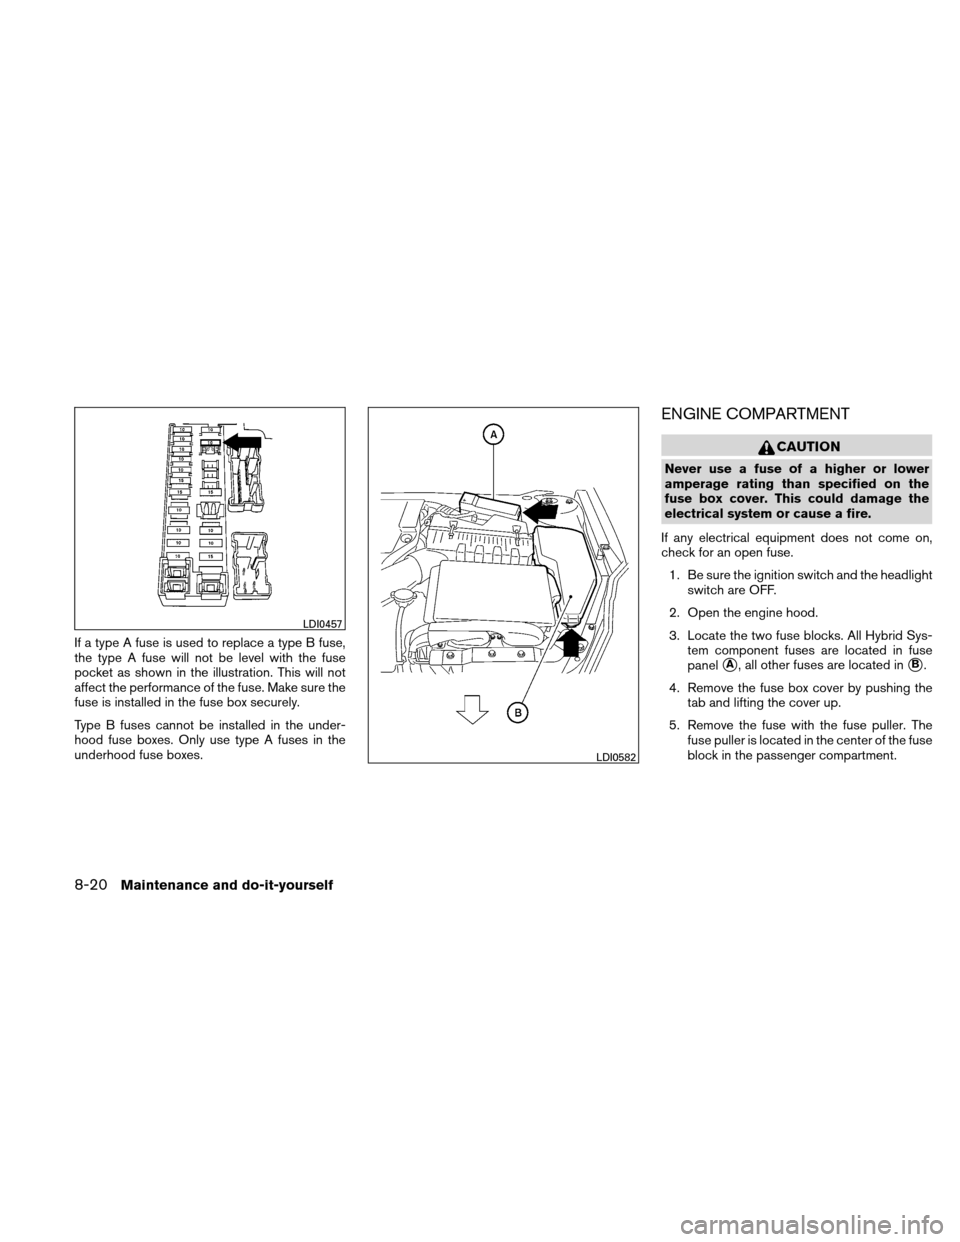 NISSAN ALTIMA HYBRID 2010 L32A / 4.G Owners Manual If a type A fuse is used to replace a type B fuse,
the type A fuse will not be level with the fuse
pocket as shown in the illustration. This will not
affect the performance of the fuse. Make sure the
